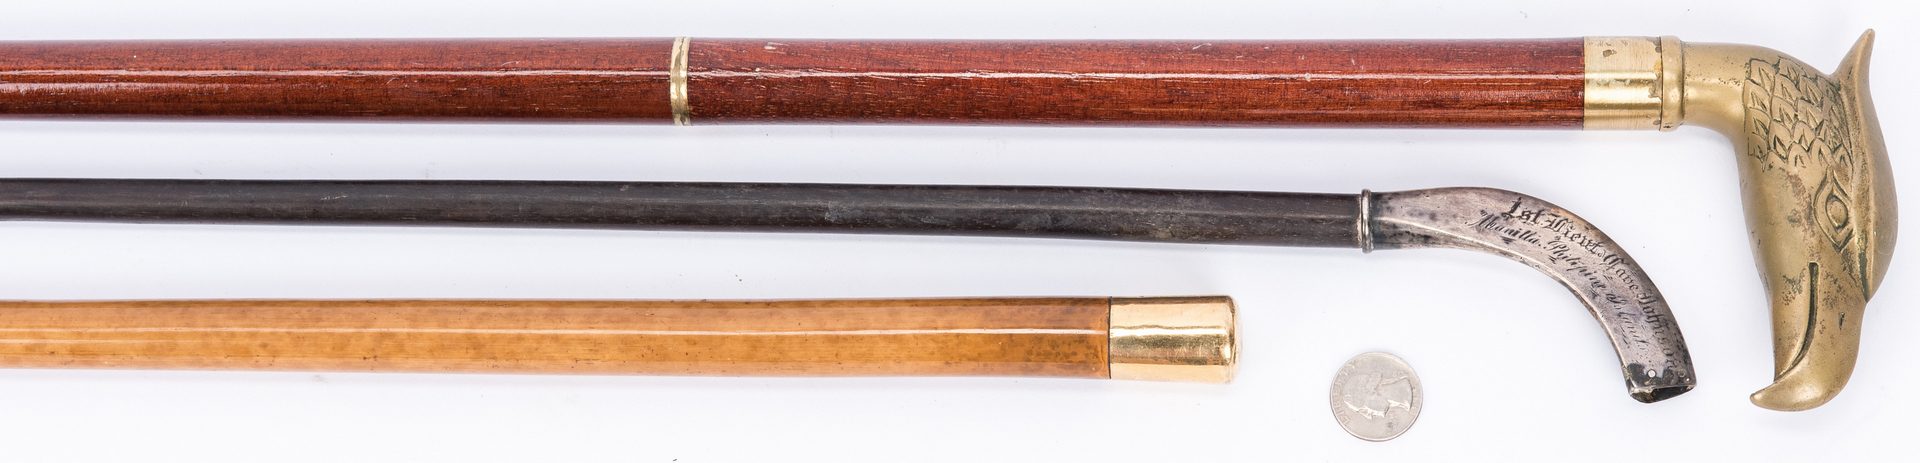 Lot 396: 3 Canes incl. 1st TN Infantry and Sword Cane